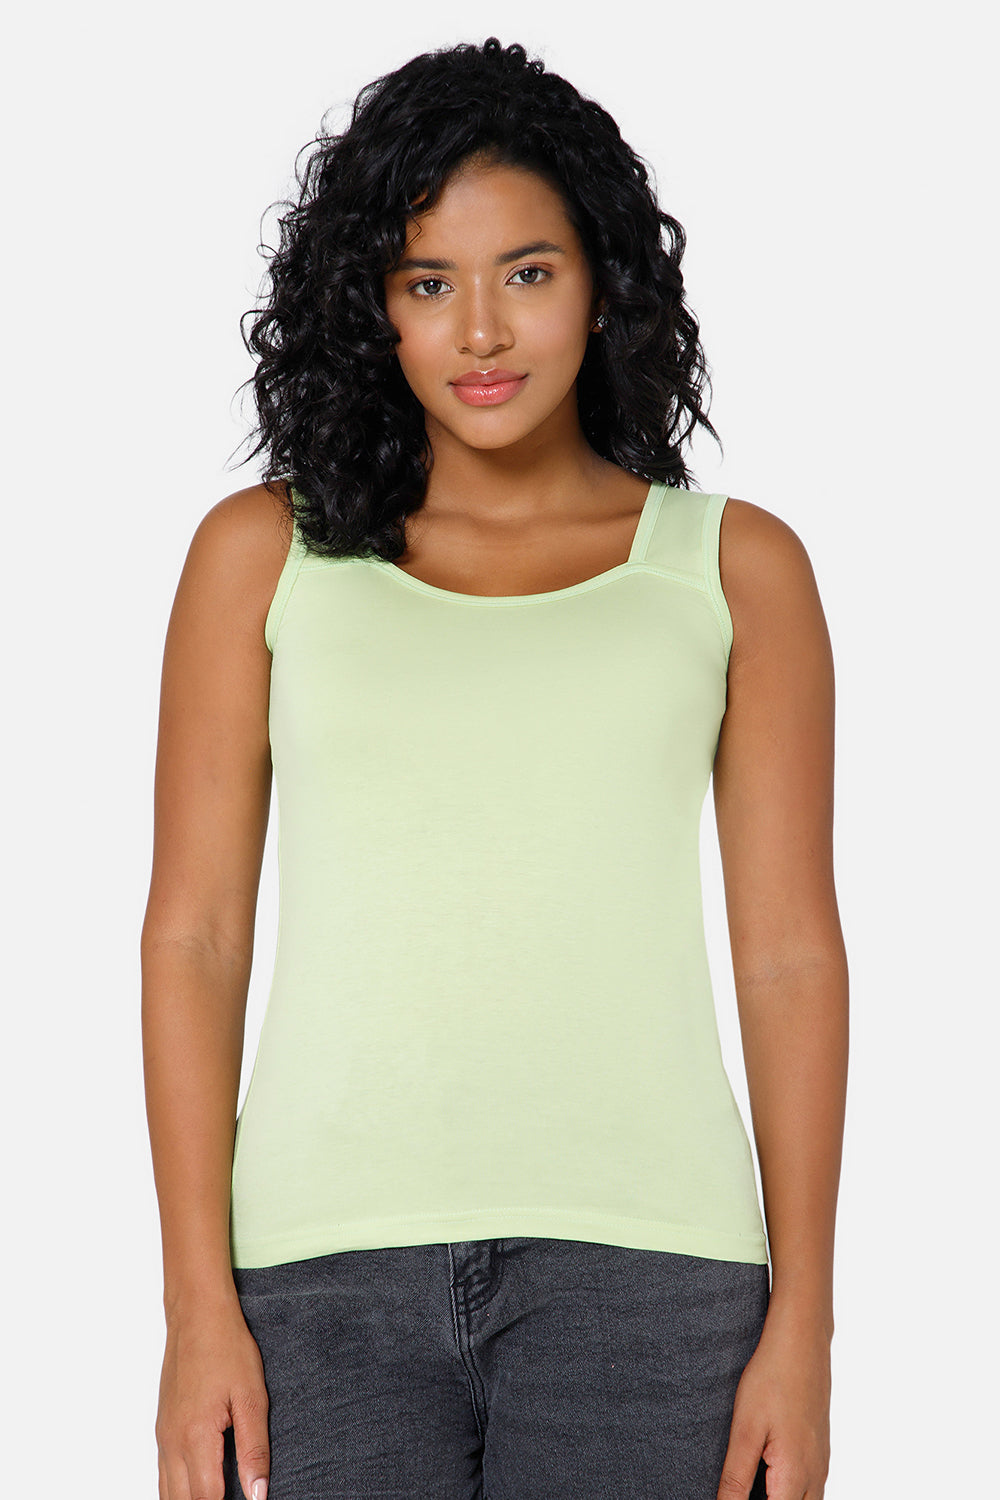 Full Coverage Sweat Absorbent Intimacy Cotton Tanktop - IN07